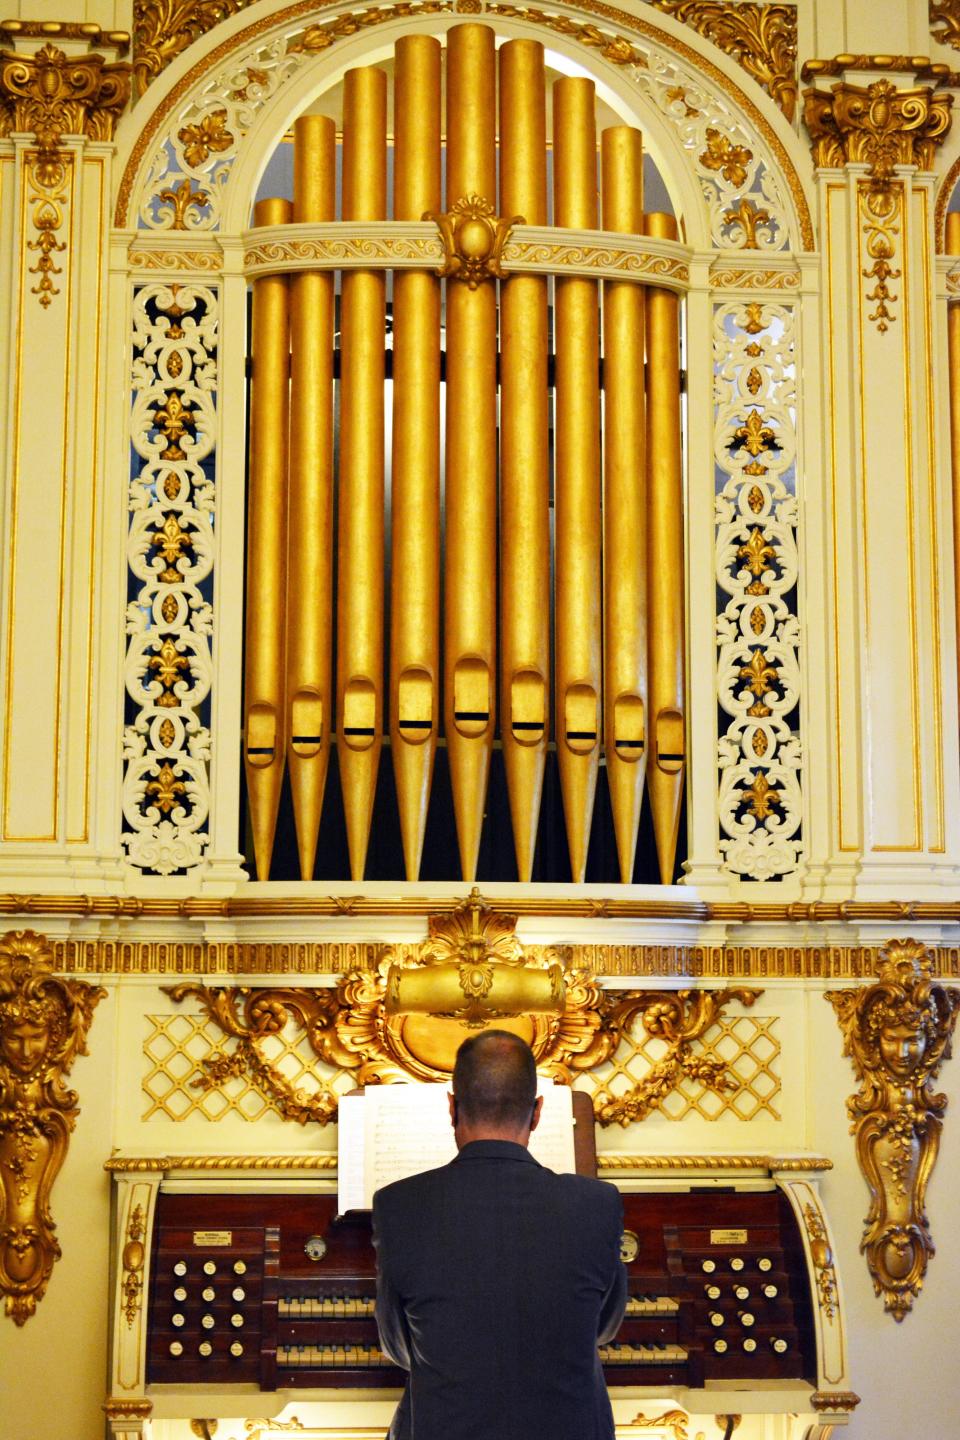 Enjoy the demonstrations of some Gilded Age instruments this weekend with general admission to the Henry Morrison Flagler Museum in Palm Beach, including this 1902 J. H. & C. S. Odell & Co. organ.